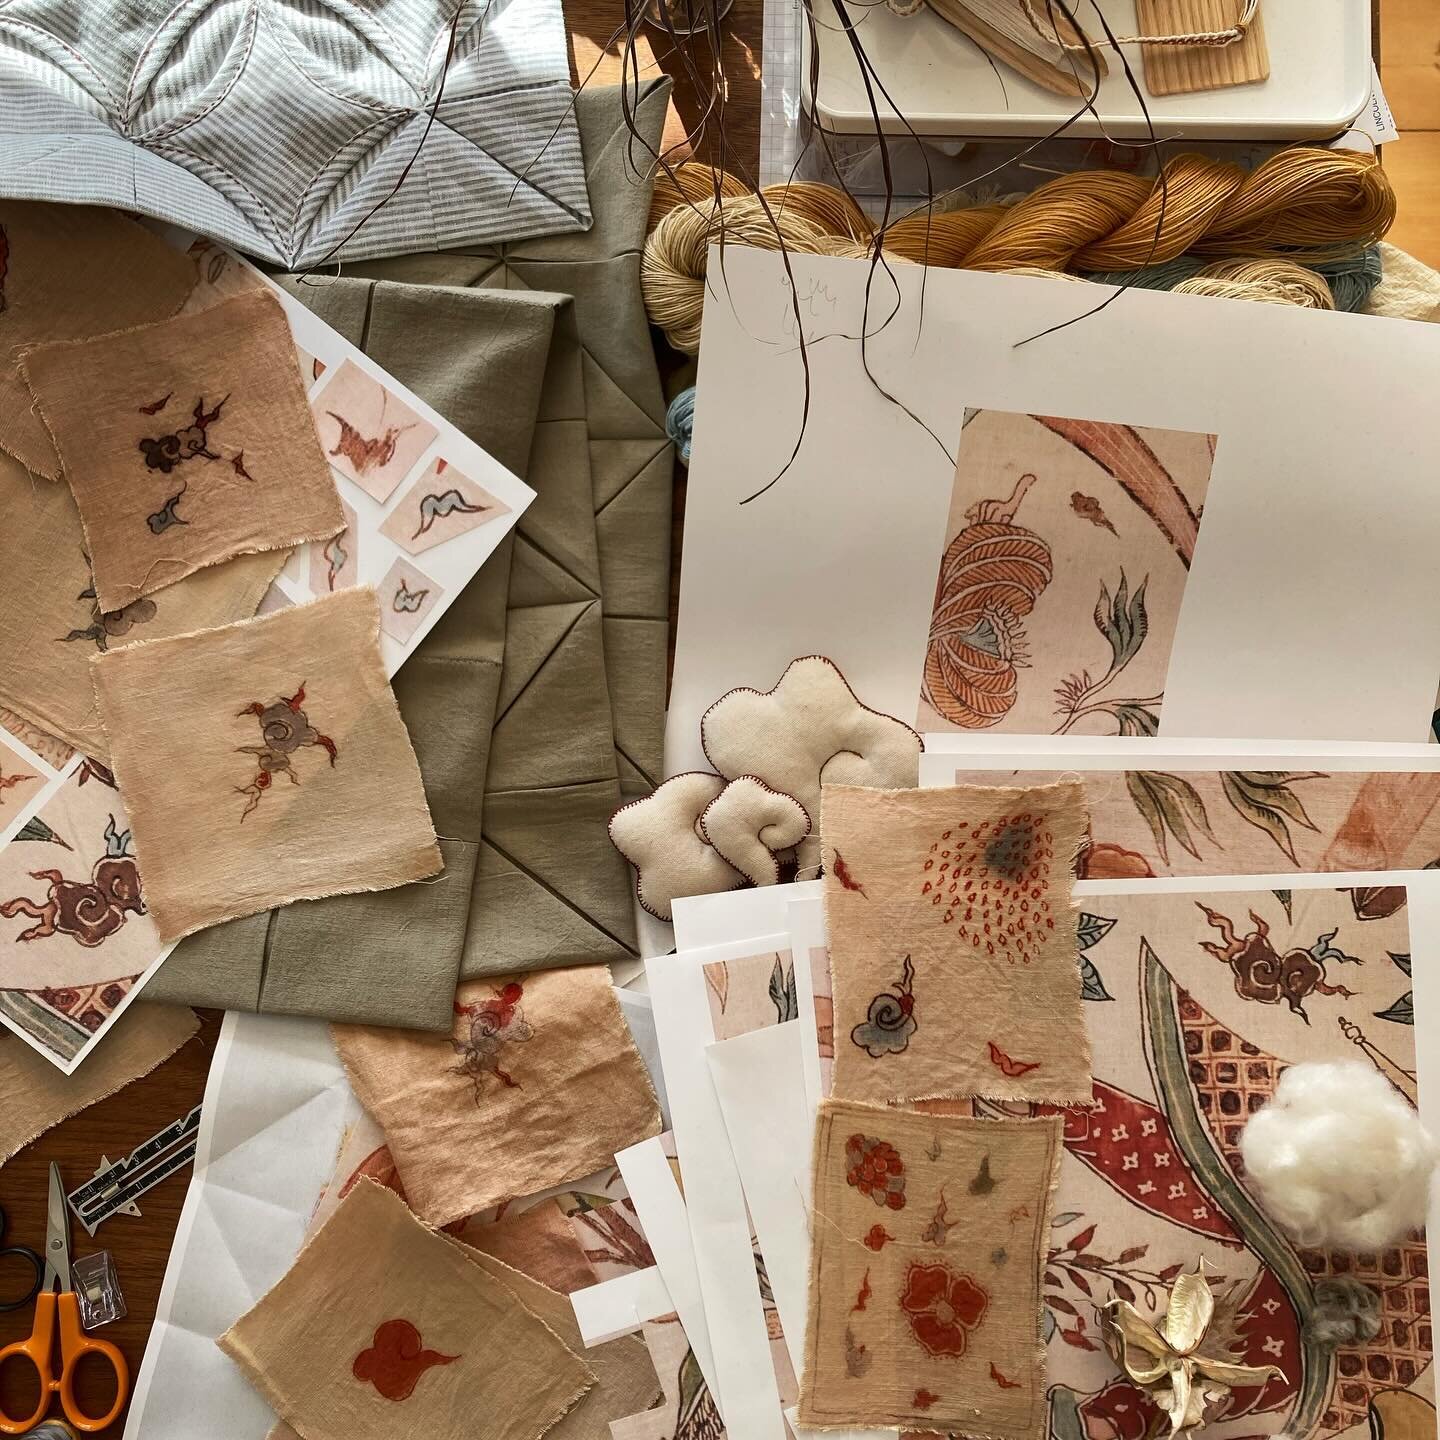 Other things that have been happening on my work table&hellip;

What began in 2019 during a Maker-Creator fellowship @winterthurmuse and evolved into a collaborative exploration of traditional chintz techniques with @scribbles_to_self has now become 